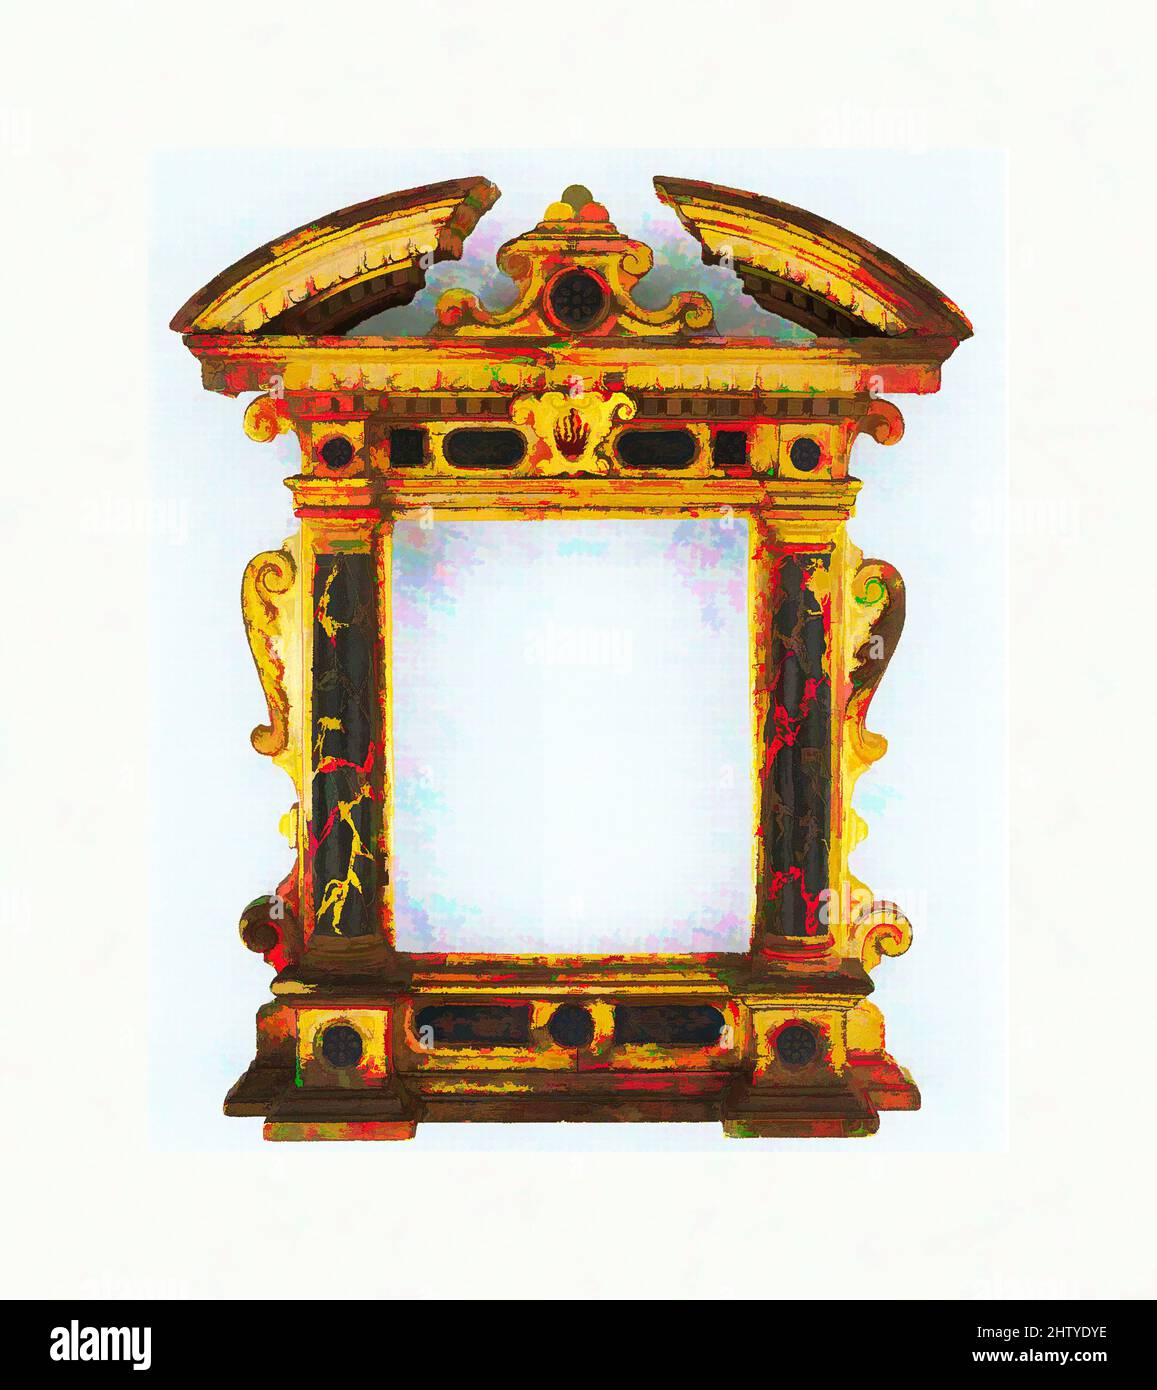 Art inspired by Tabernacle frame, early 17th century, Italian, Marches, Carved, gilt and painted poplar, Overall: 17 x 14 in, Frames, Classic works modernized by Artotop with a splash of modernity. Shapes, color and value, eye-catching visual impact on art. Emotions through freedom of artworks in a contemporary way. A timeless message pursuing a wildly creative new direction. Artists turning to the digital medium and creating the Artotop NFT Stock Photo